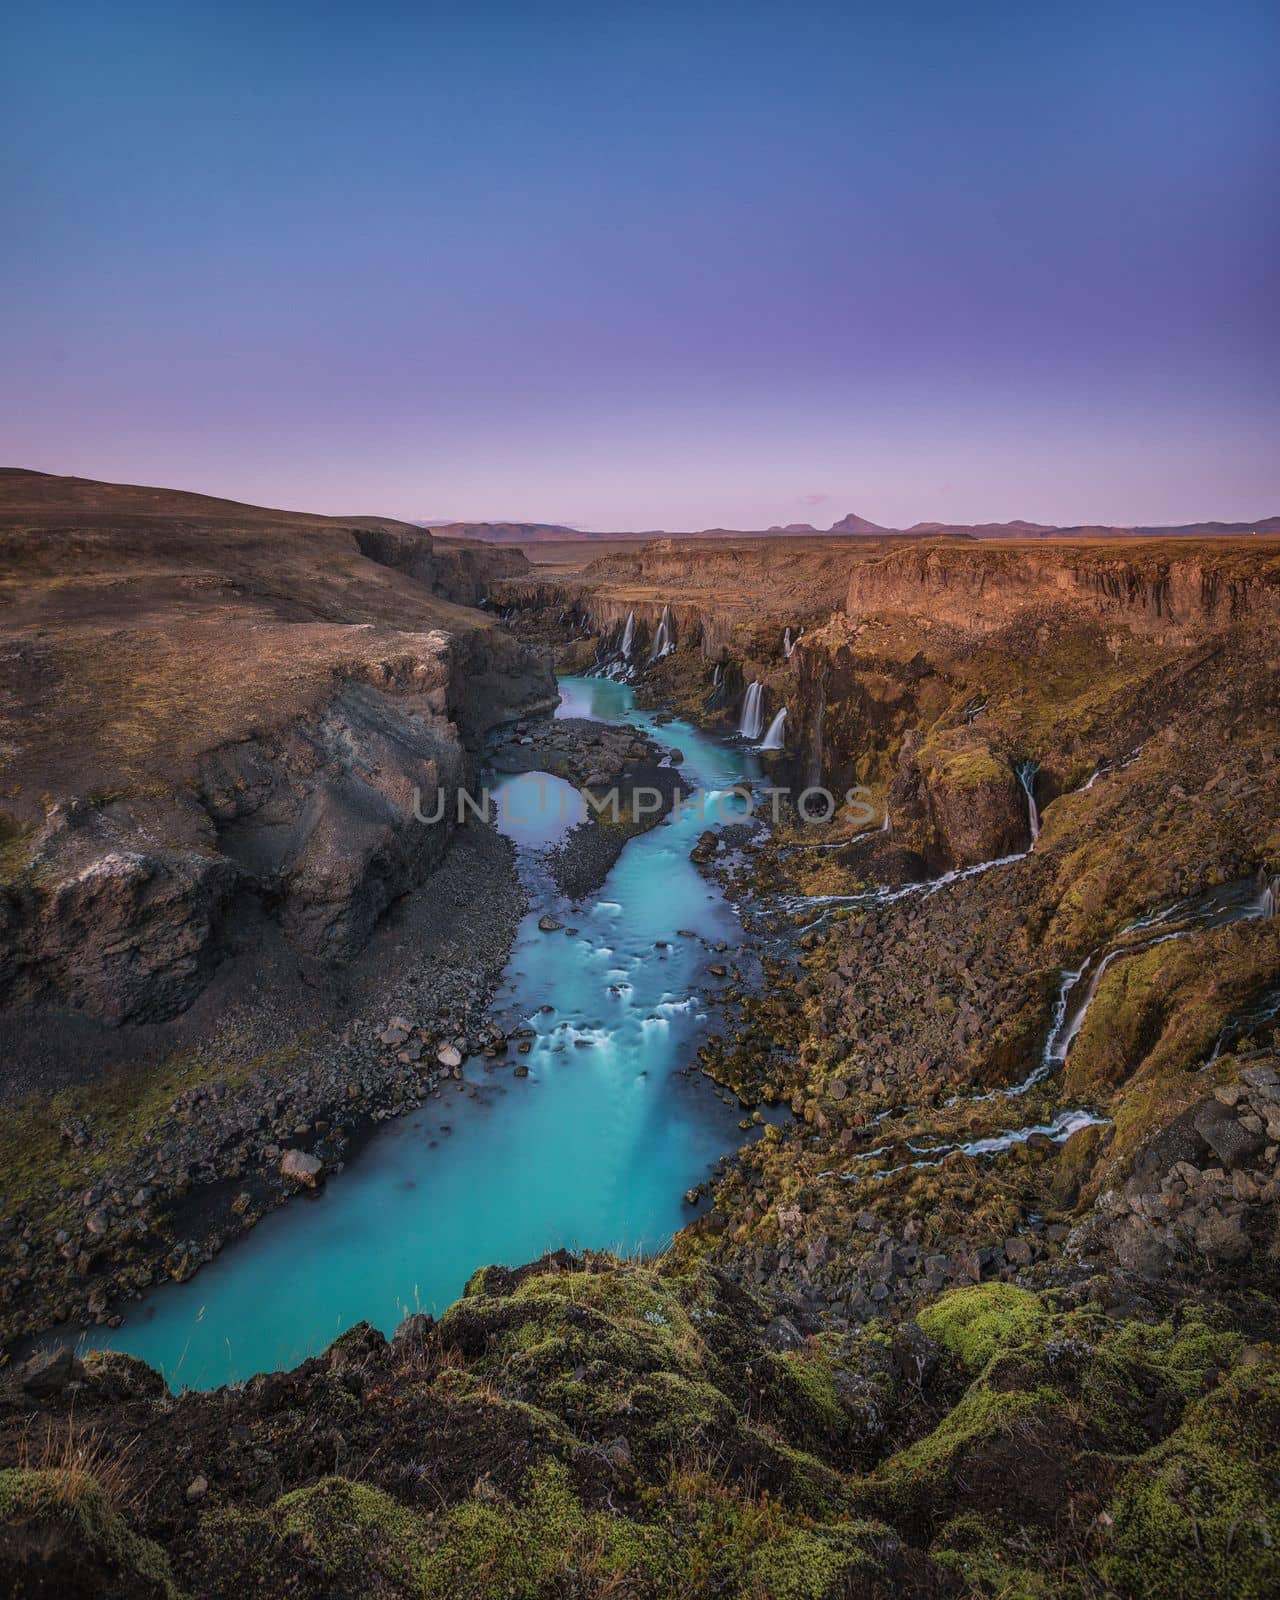 Icelands mountainous landscape combined with northern latitude, which has lots of rain, snow, and glaciers, is why the country has so many waterfalls and cascading water slopes.